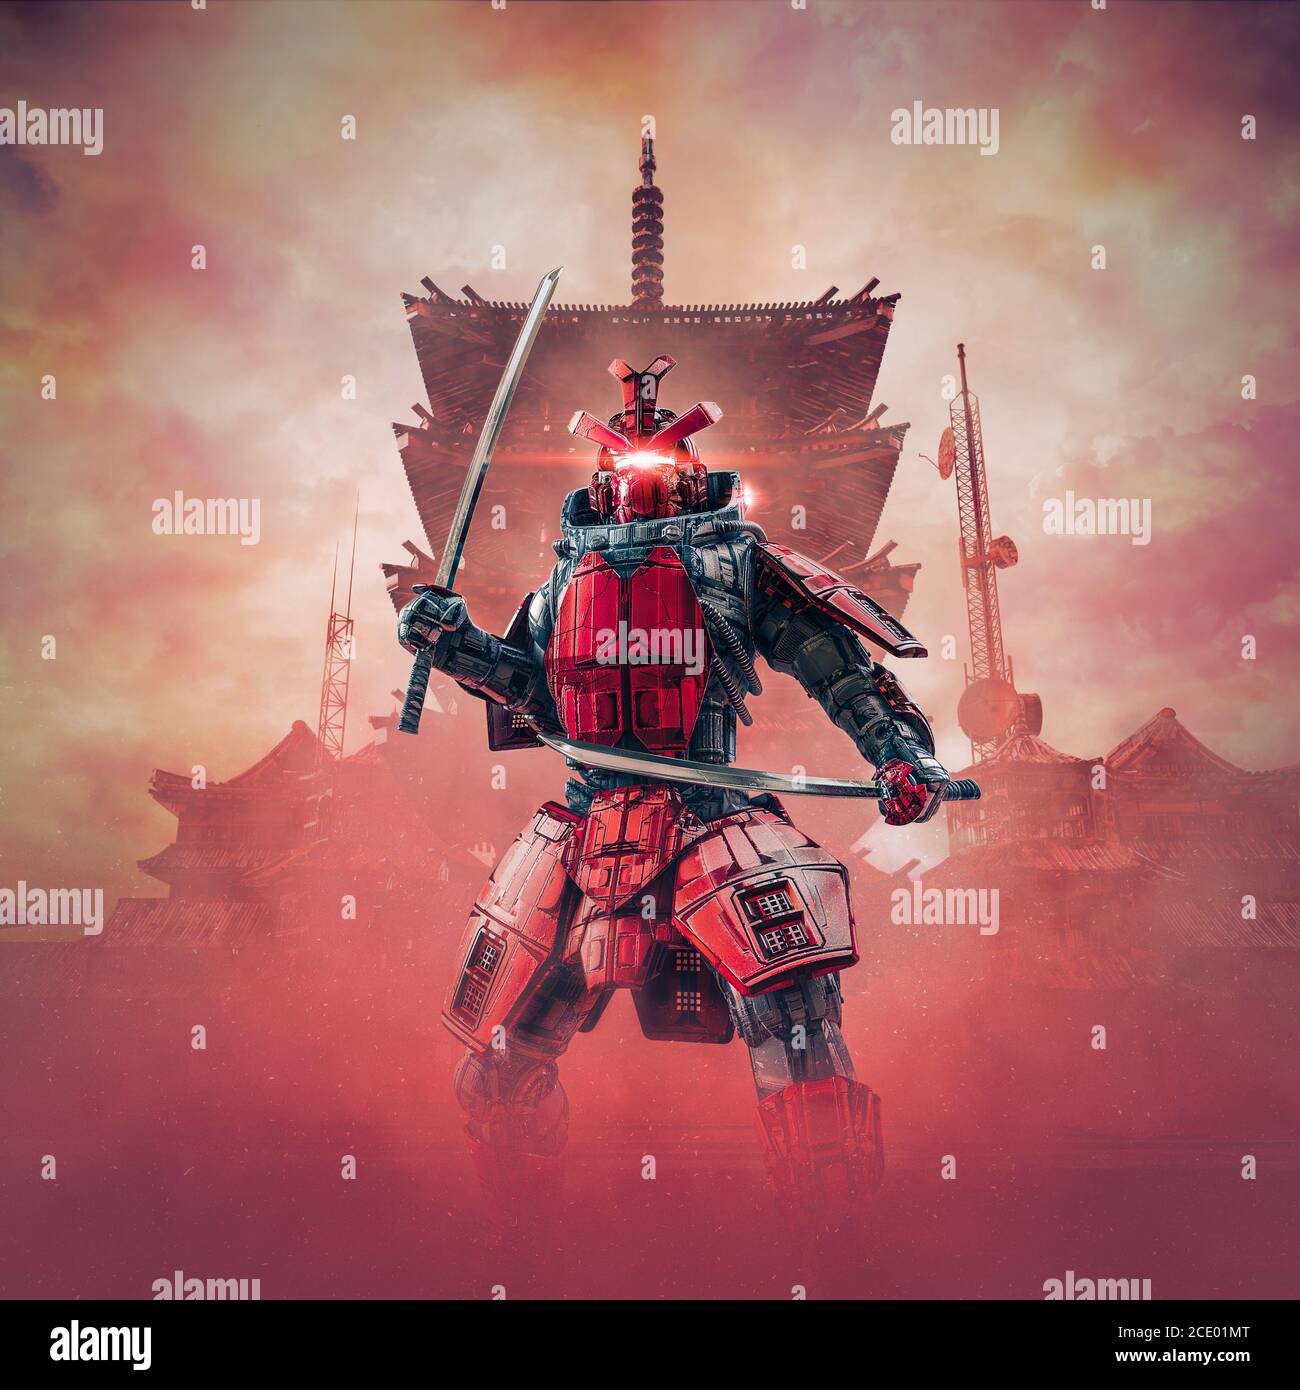 Cyborg samurai warrior / 3D illustration of science fiction cyberpunk armoured robot with katana swords with oriental buildings in background Stock Photo